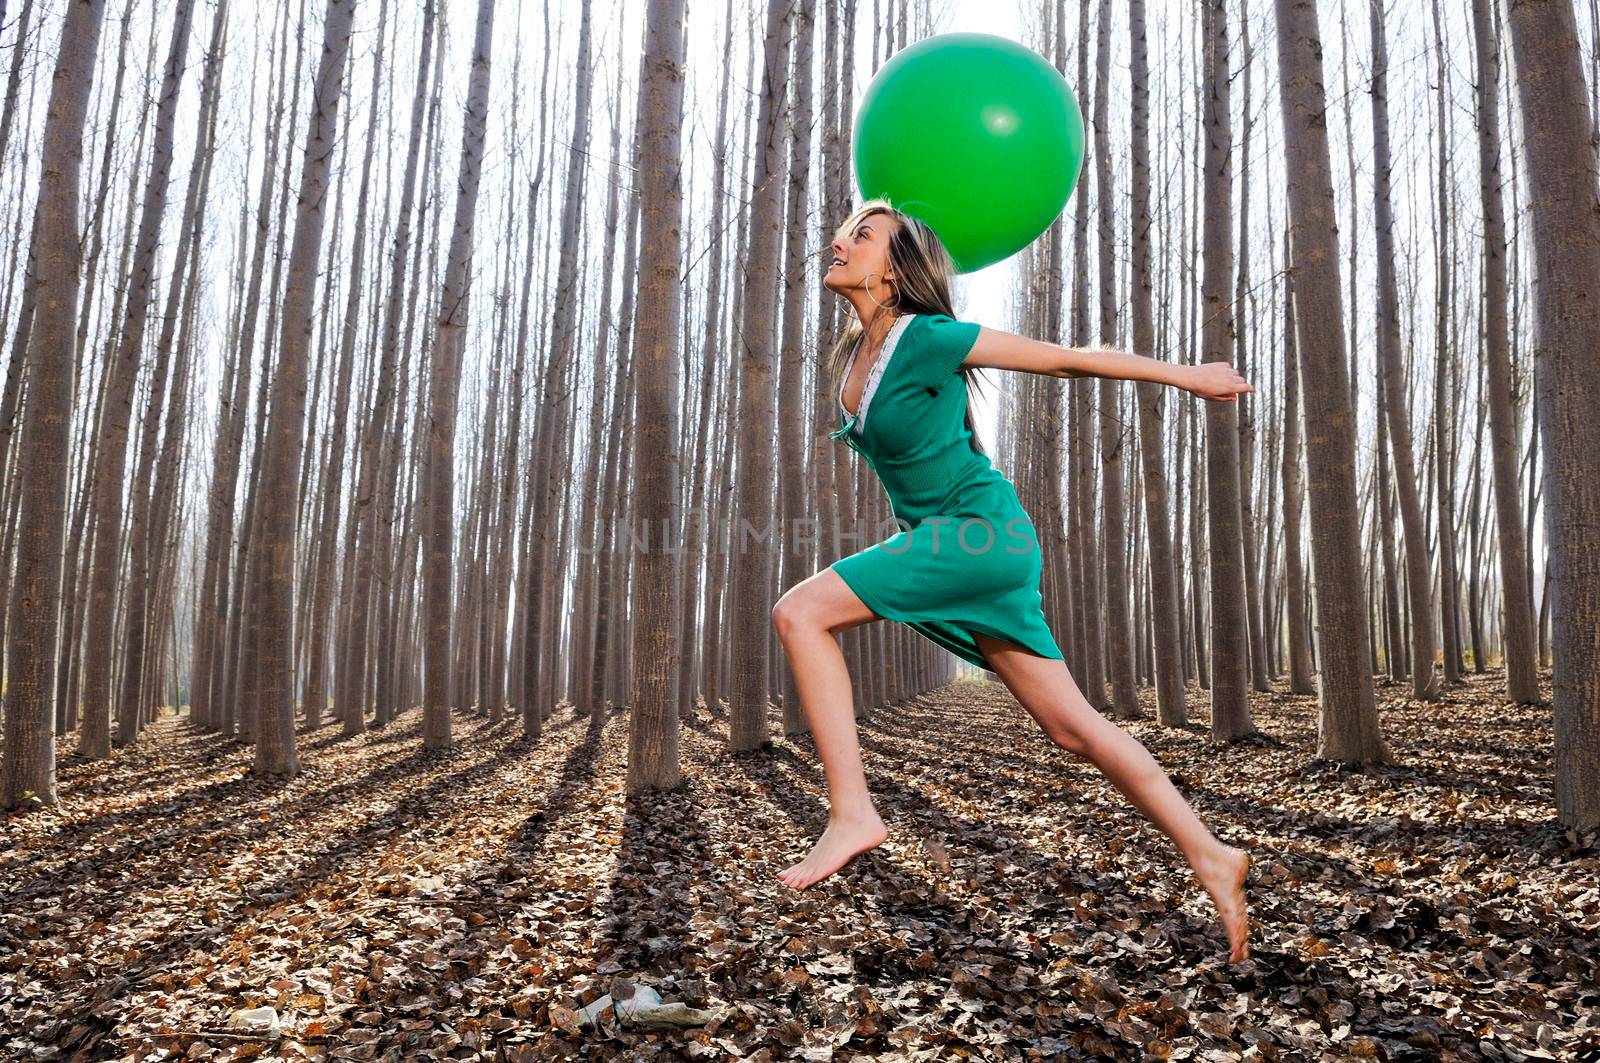 Beautiful blonde girl, dressed in green, jumping into the woods with a balloon. by javiindy